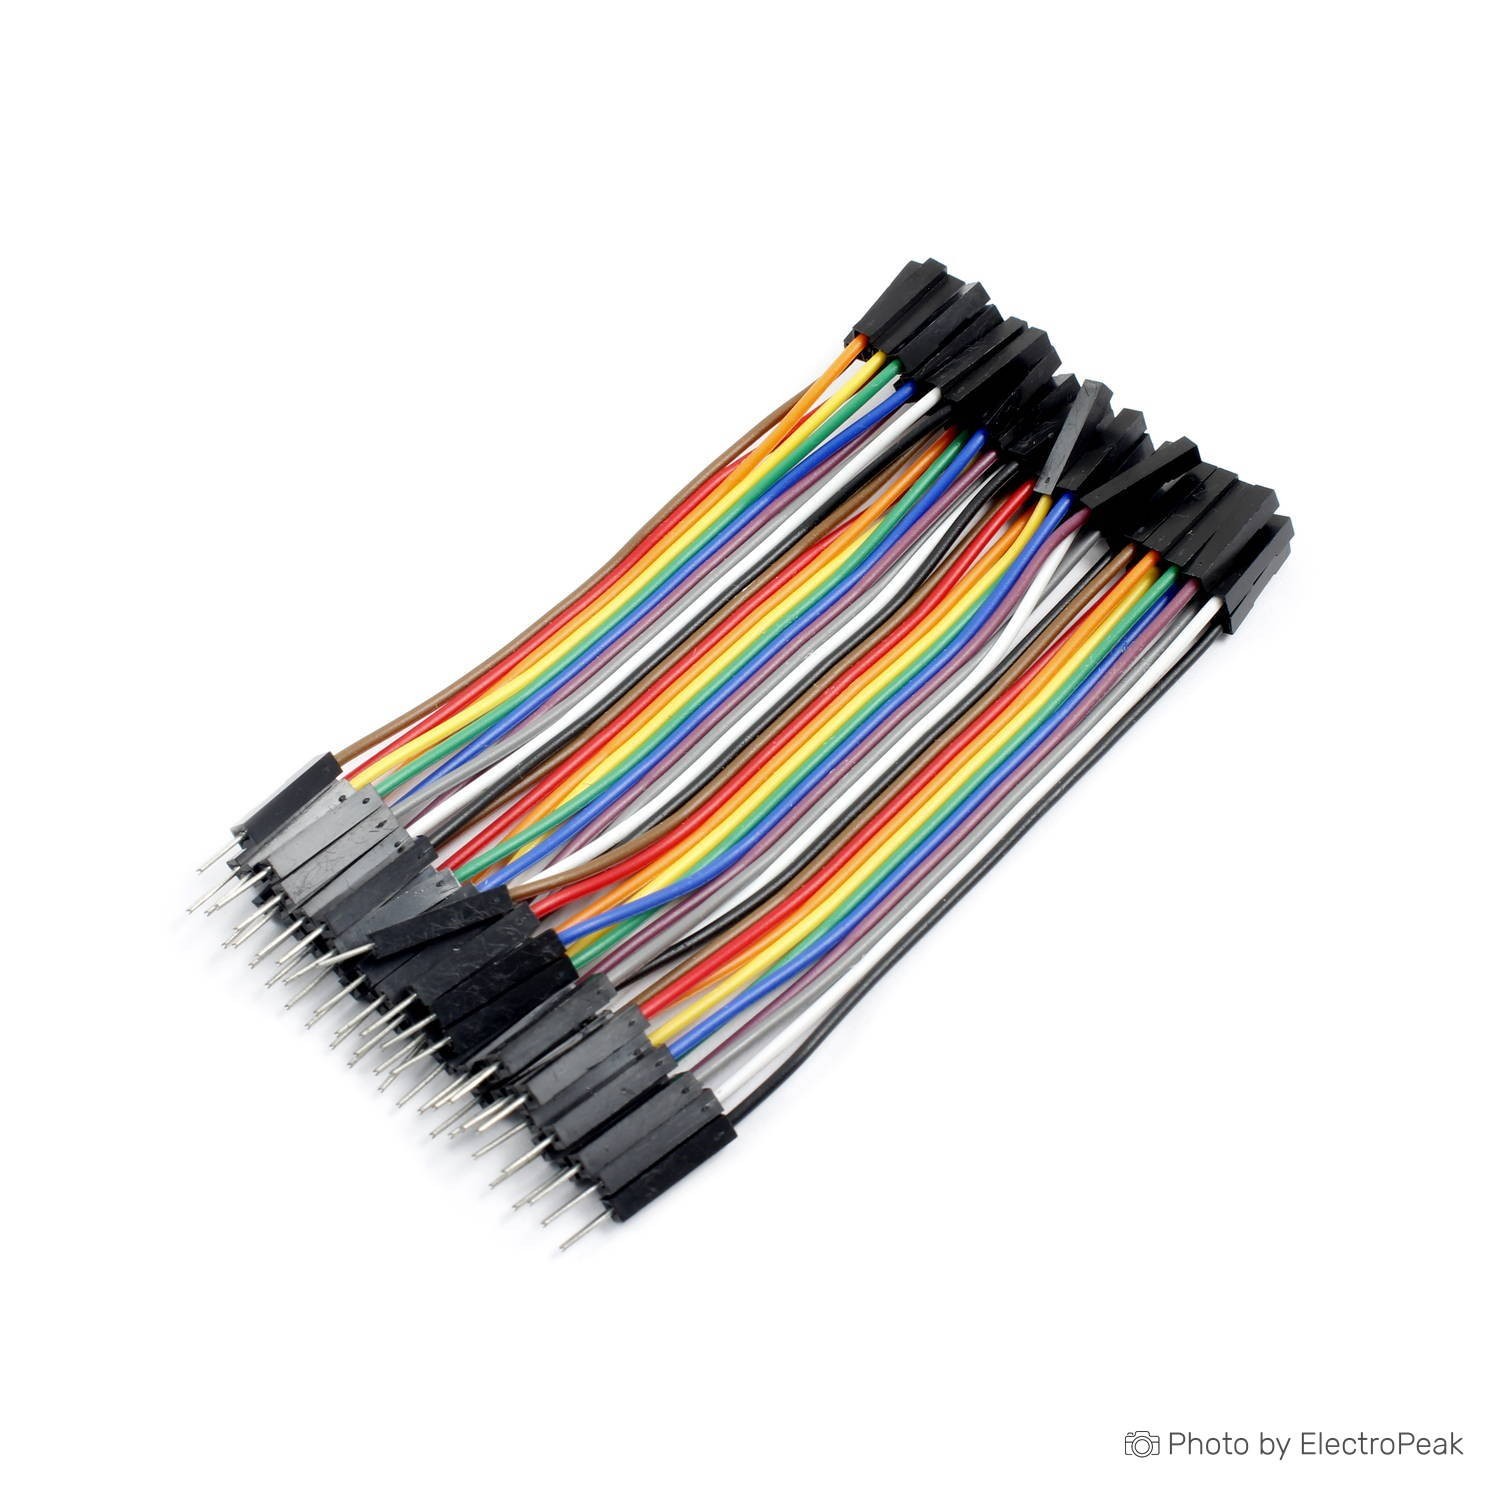 10cm Female - Female 40 Wire Dupont Cable